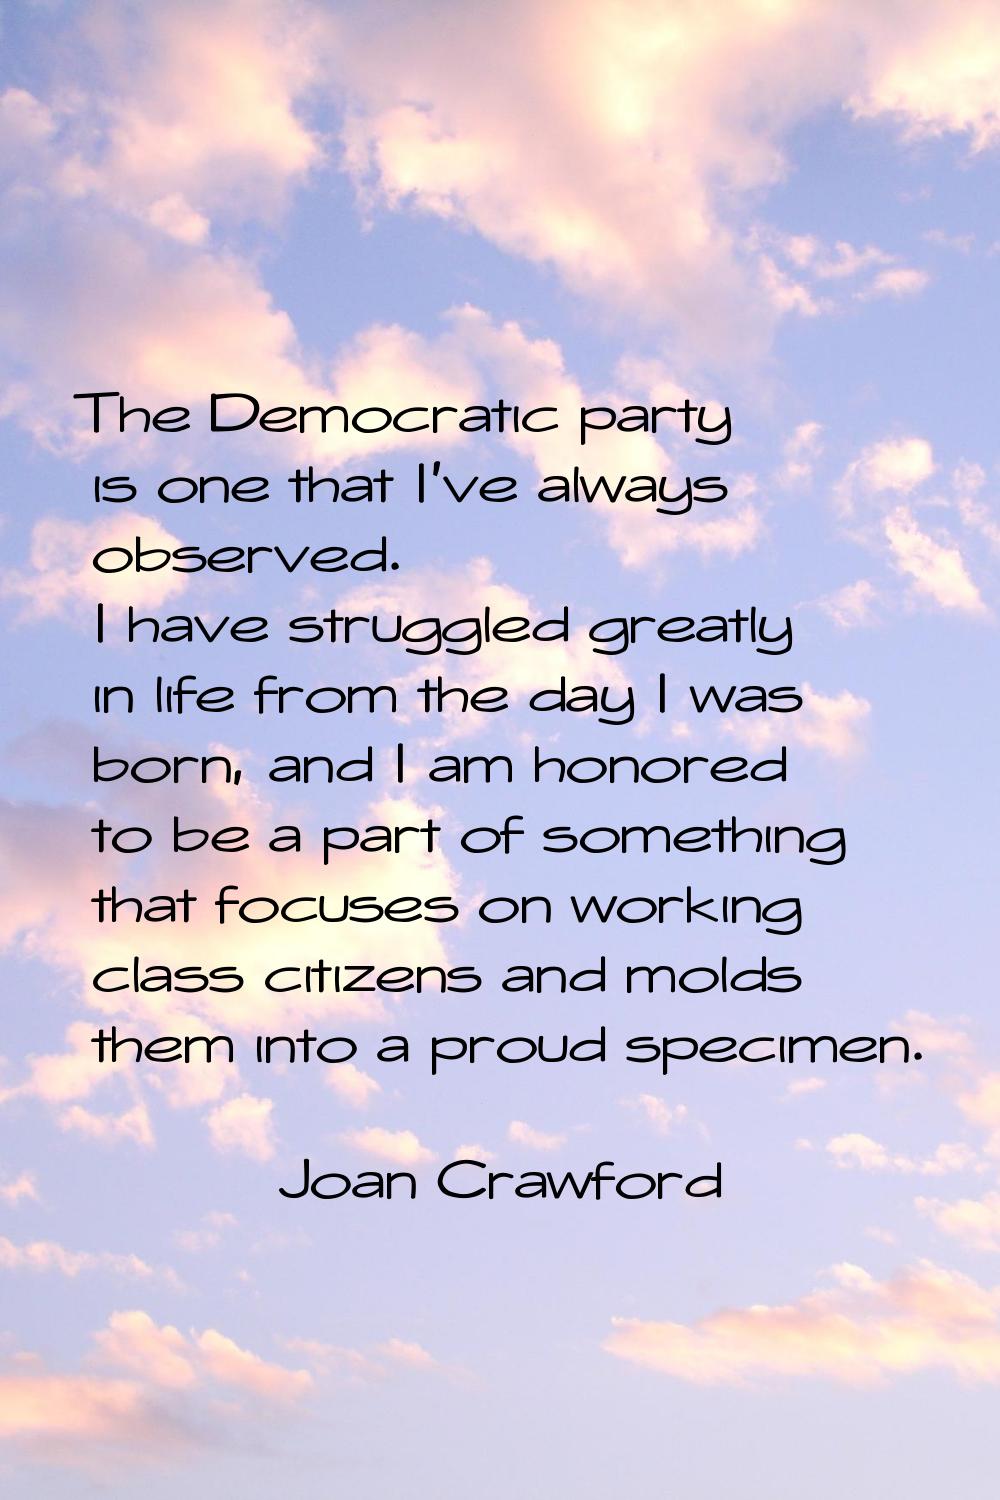 The Democratic party is one that I've always observed. I have struggled greatly in life from the da